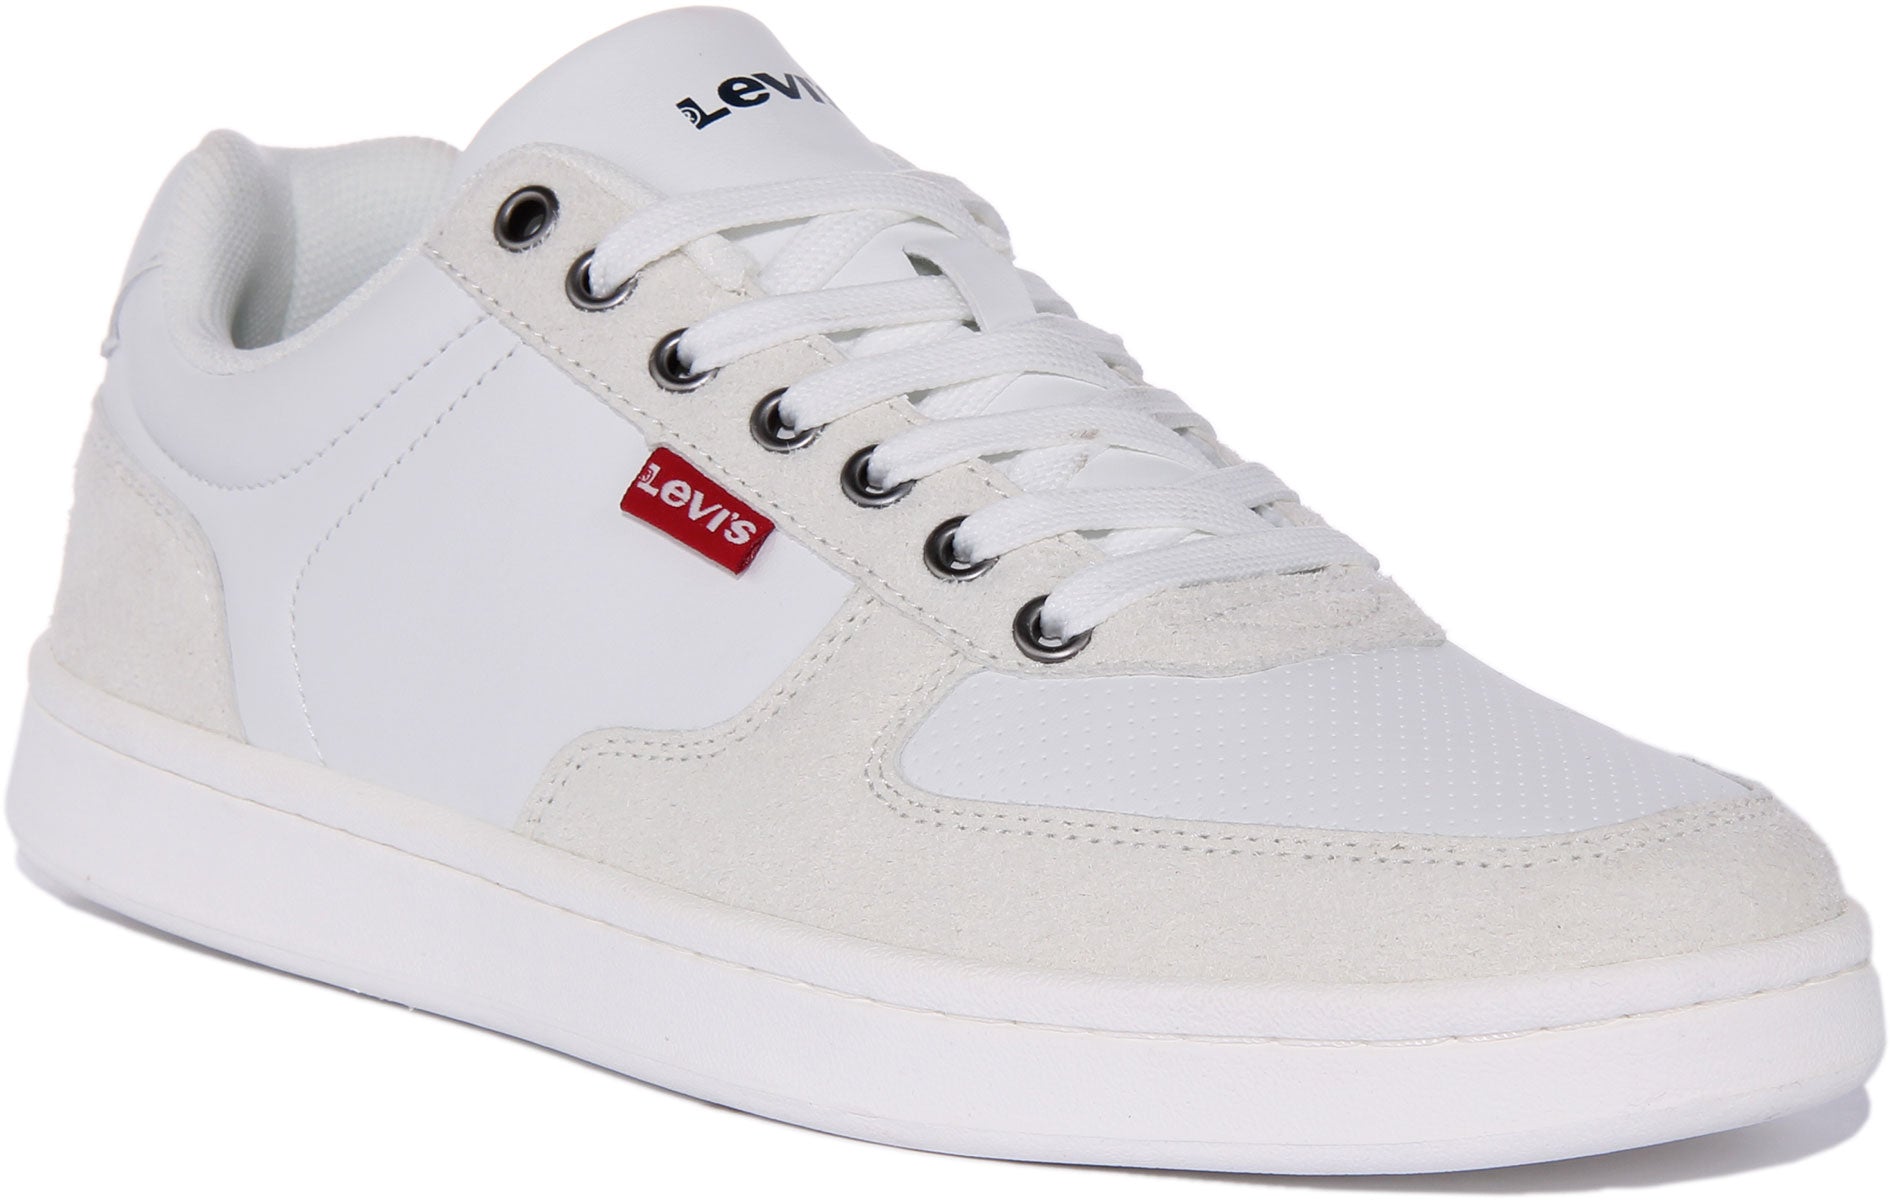 Mullet Sneakers - White | Levi's® US